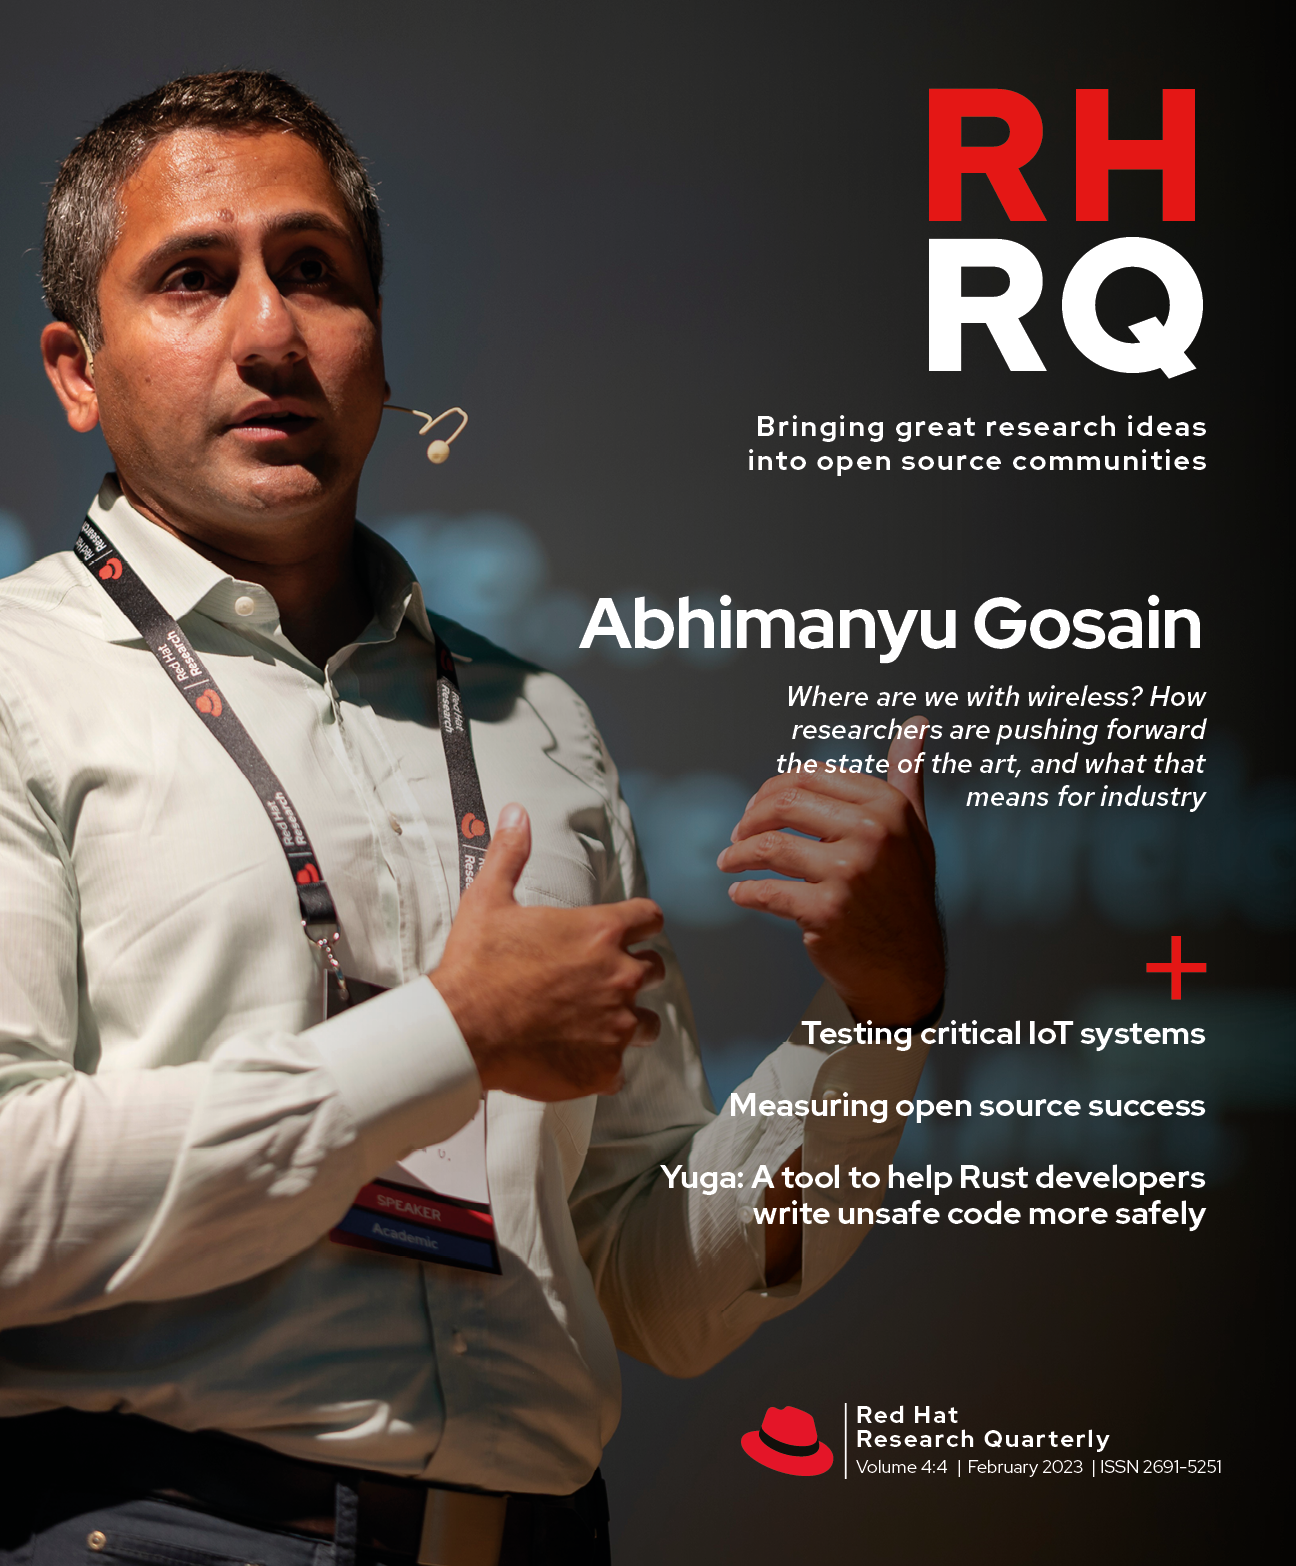 RHRQ Issue August 2022 cover with Tomas Cerny, professor at Baylor University